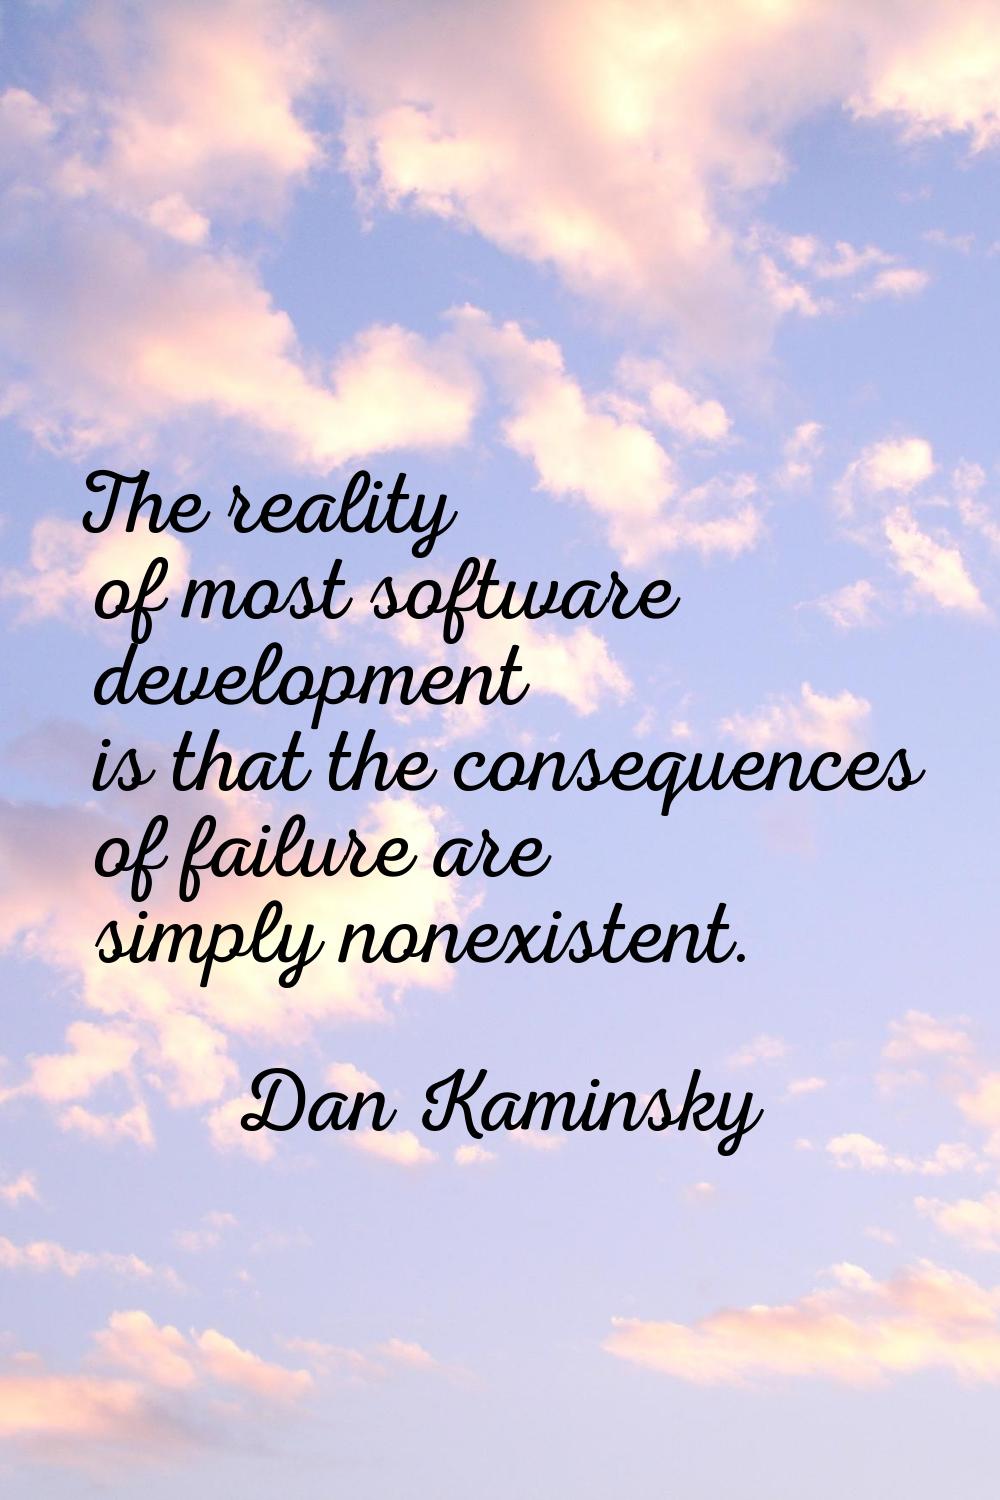 The reality of most software development is that the consequences of failure are simply nonexistent